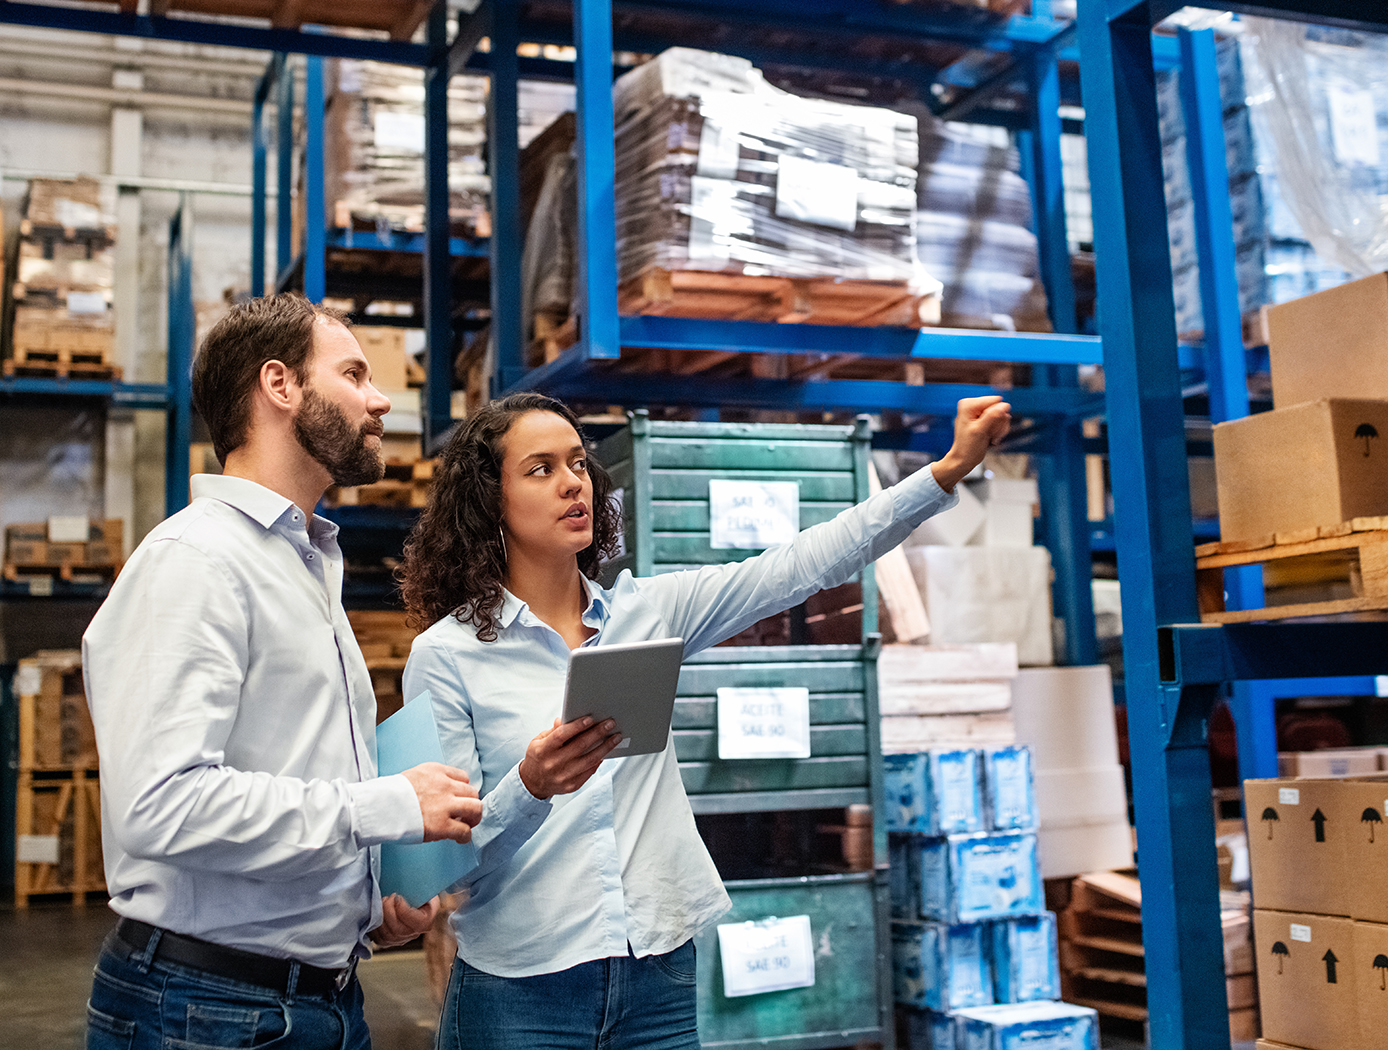 Two employees in a warehouse leverage the HYDRA system to track inventory.